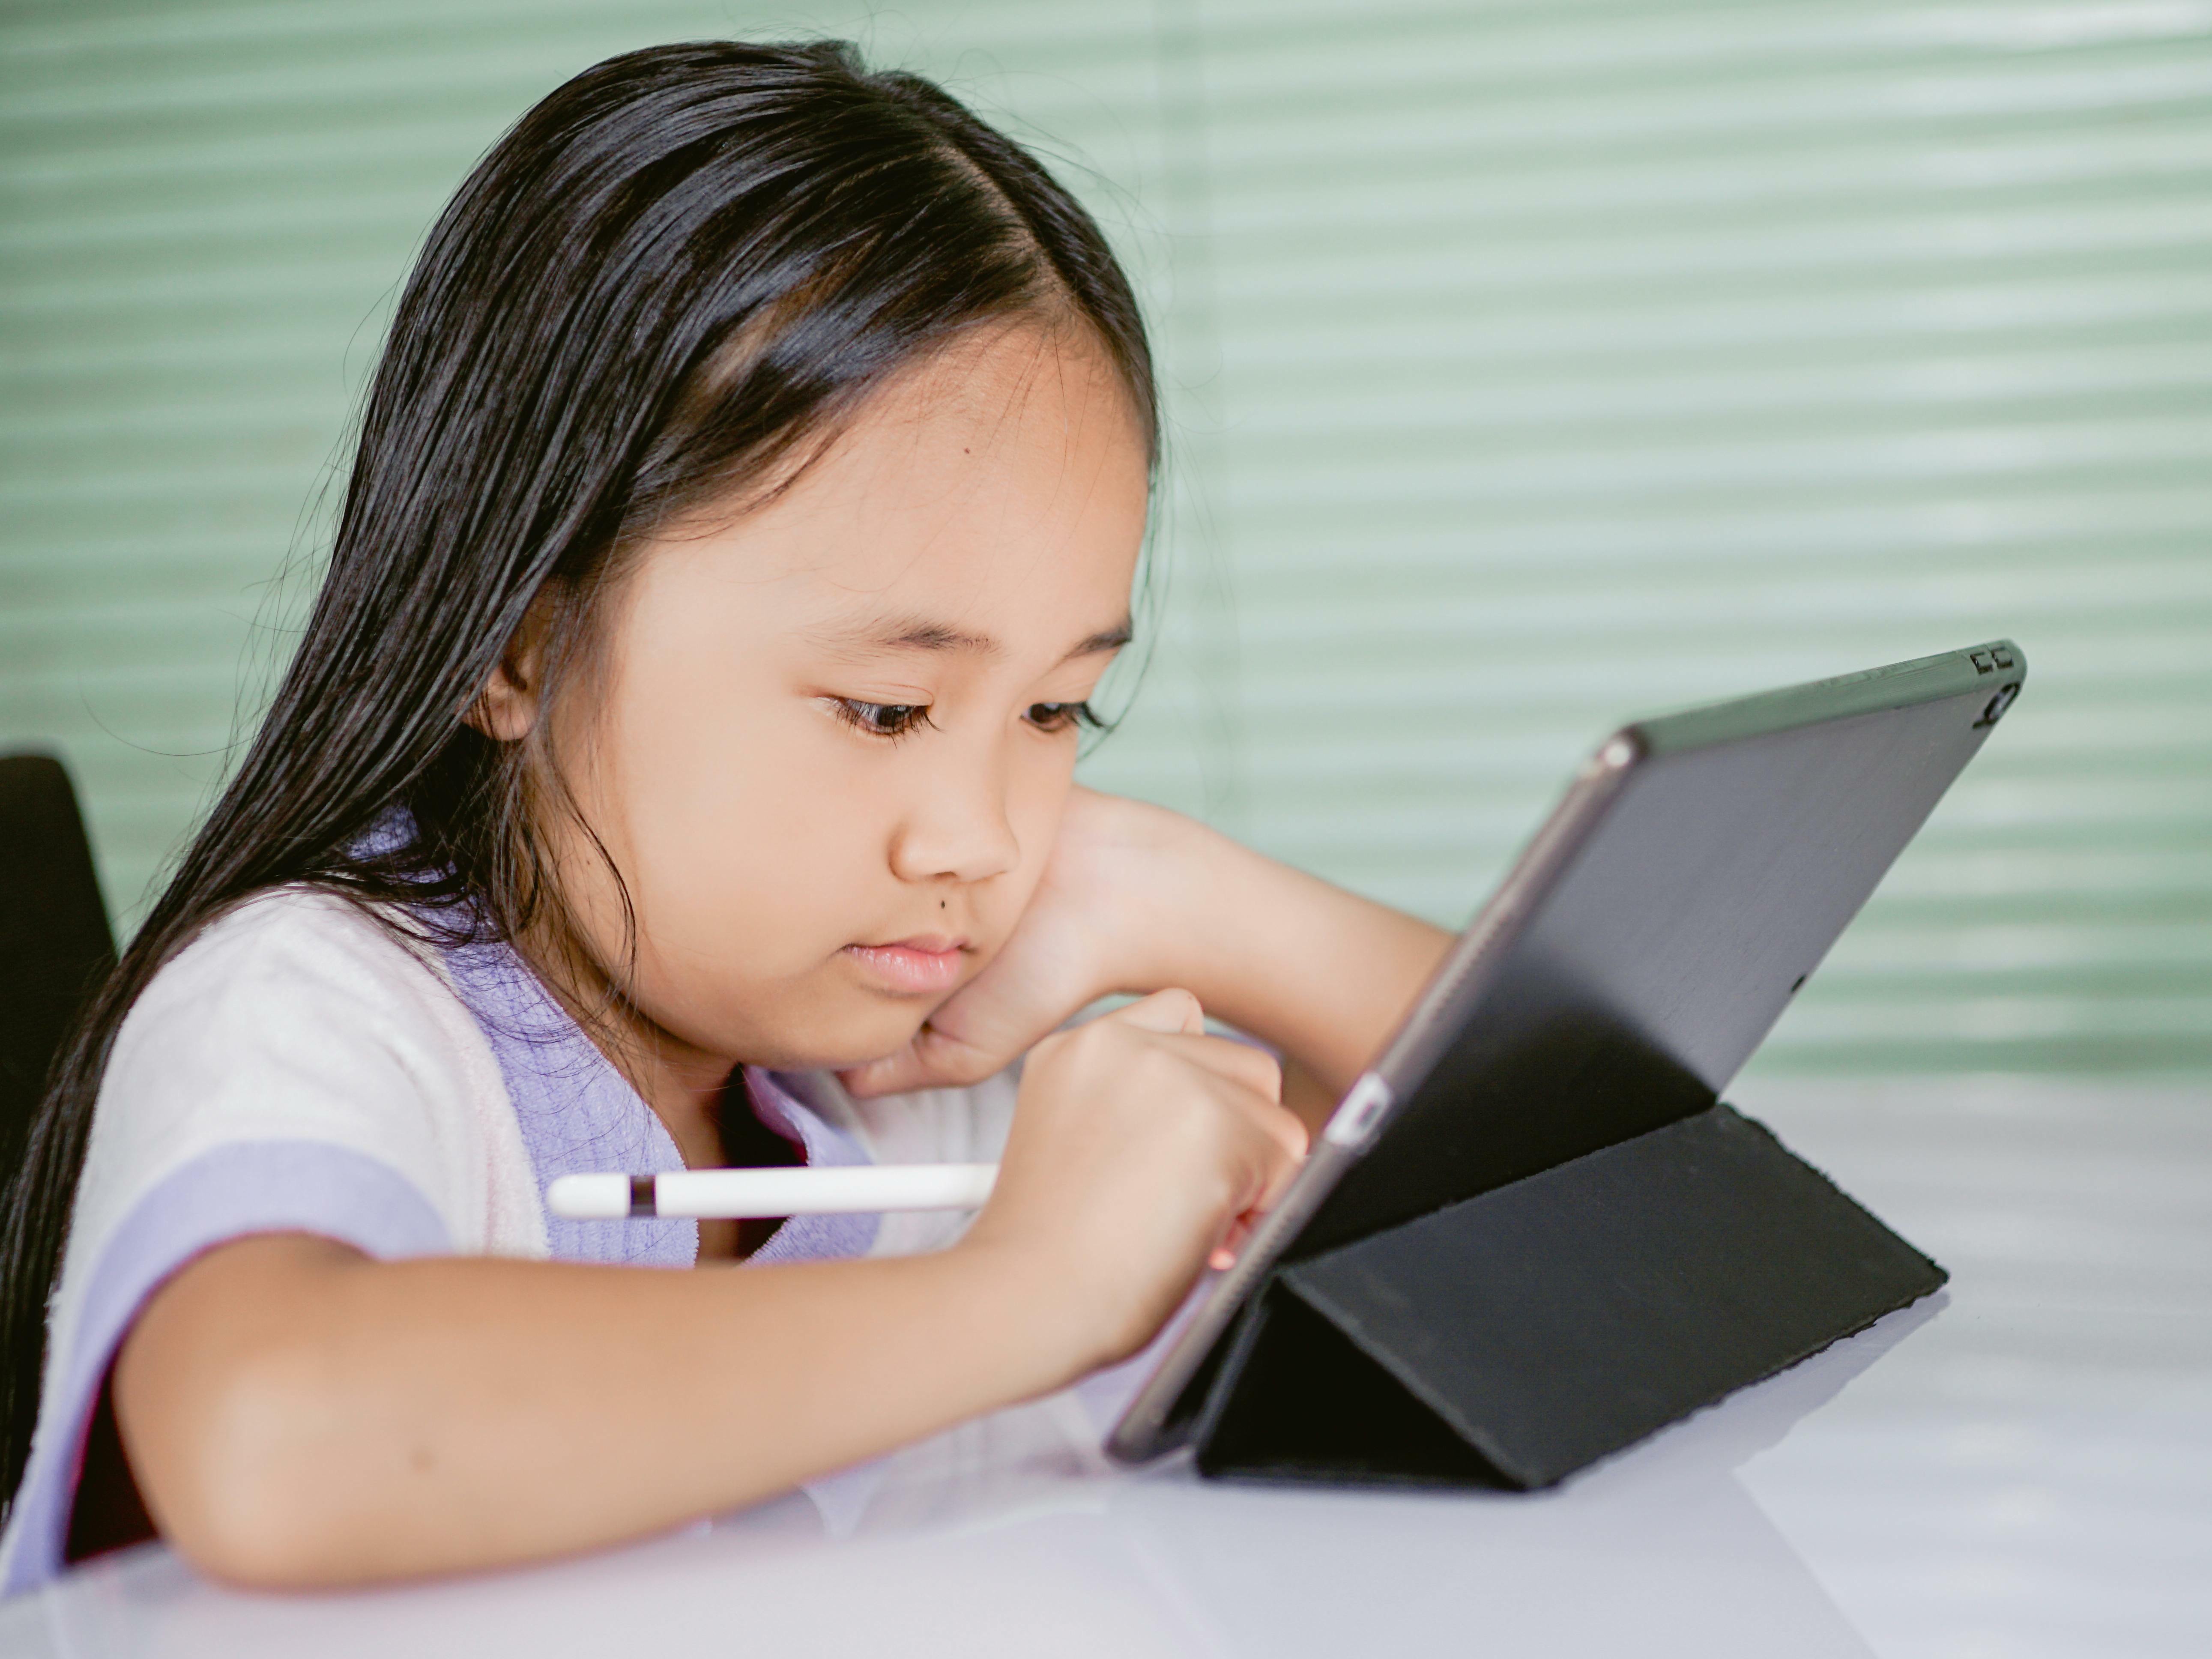 A child using a tablet